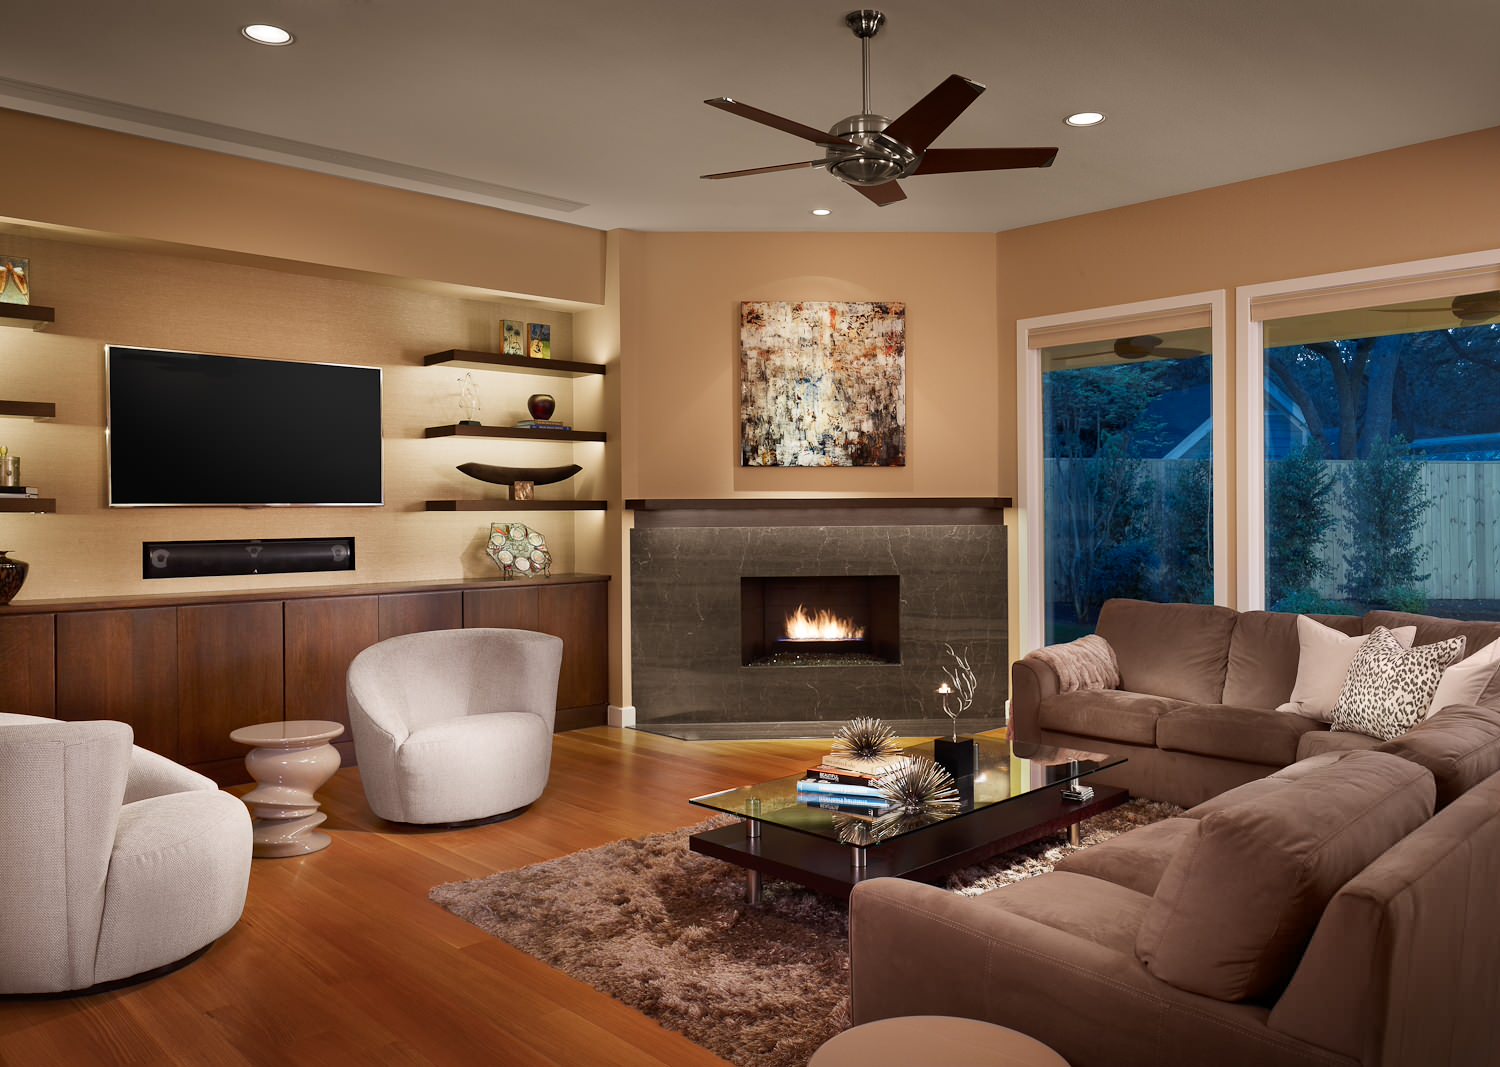 Corner Fireplace Pictures Ideas, Design Ideas For Small Living Room With Corner Fireplace